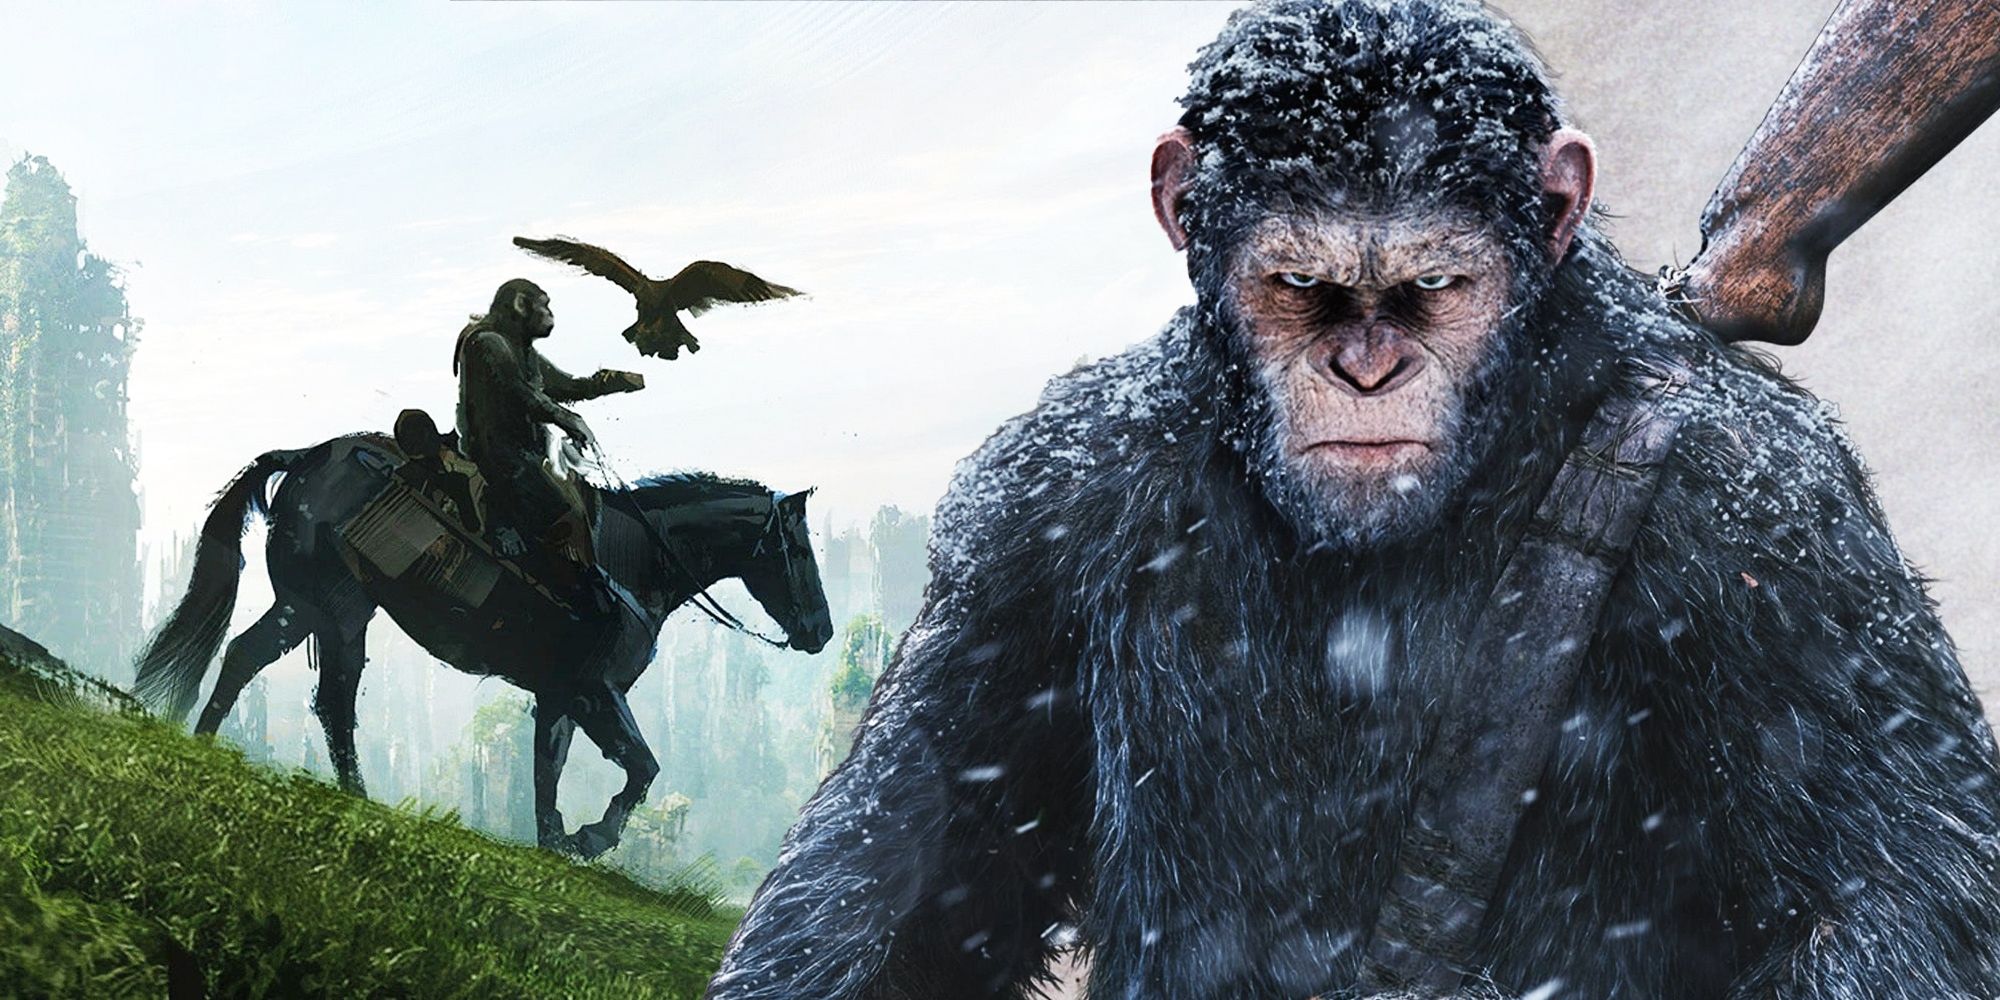 Custom image of Caesar with a rifle against the backdrop of the Kingdom of the Planet of the Apes landscape